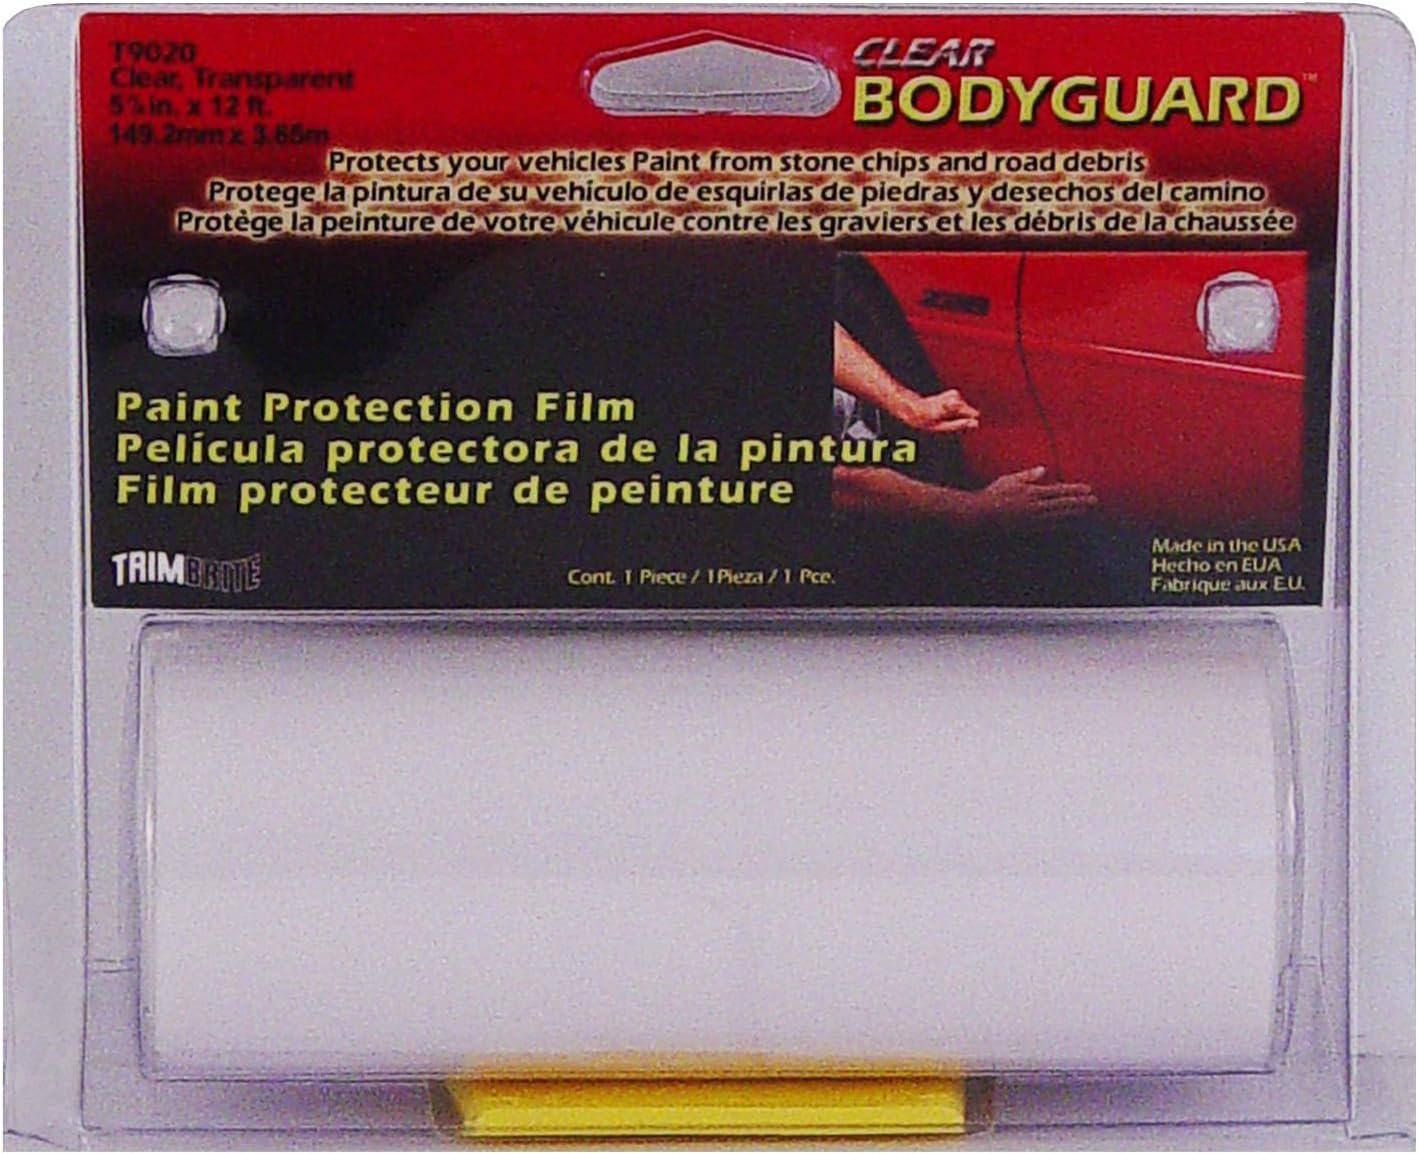 Trimbrite BodyGuard Clear Smooth Protection Film (12' x 5 7/8")